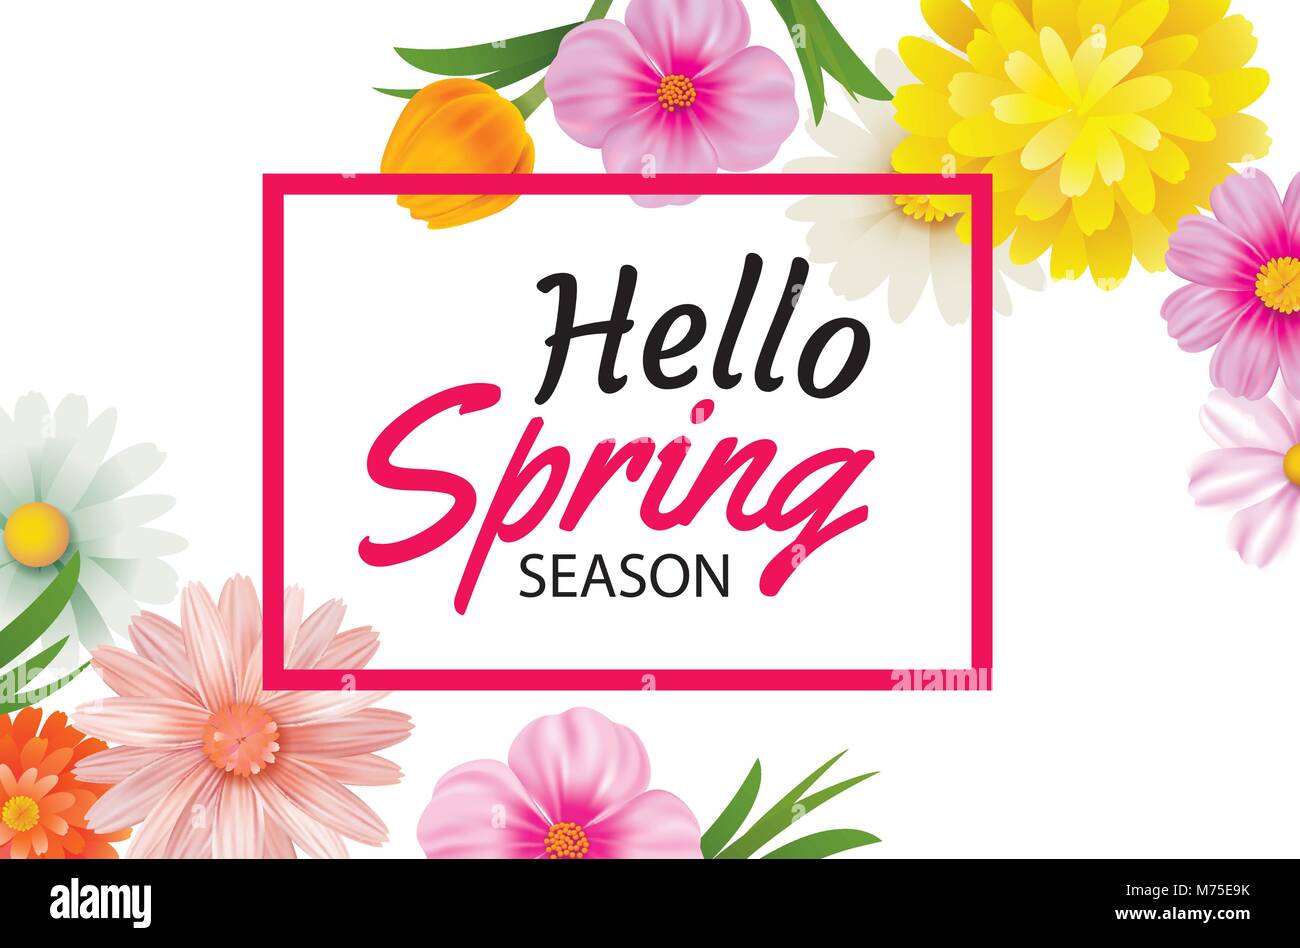 Hello spring banner template with colorful flower.Can be use voucher, wallpaper,flyers, invitation, posters, brochure, coupon discount. Stock Vector